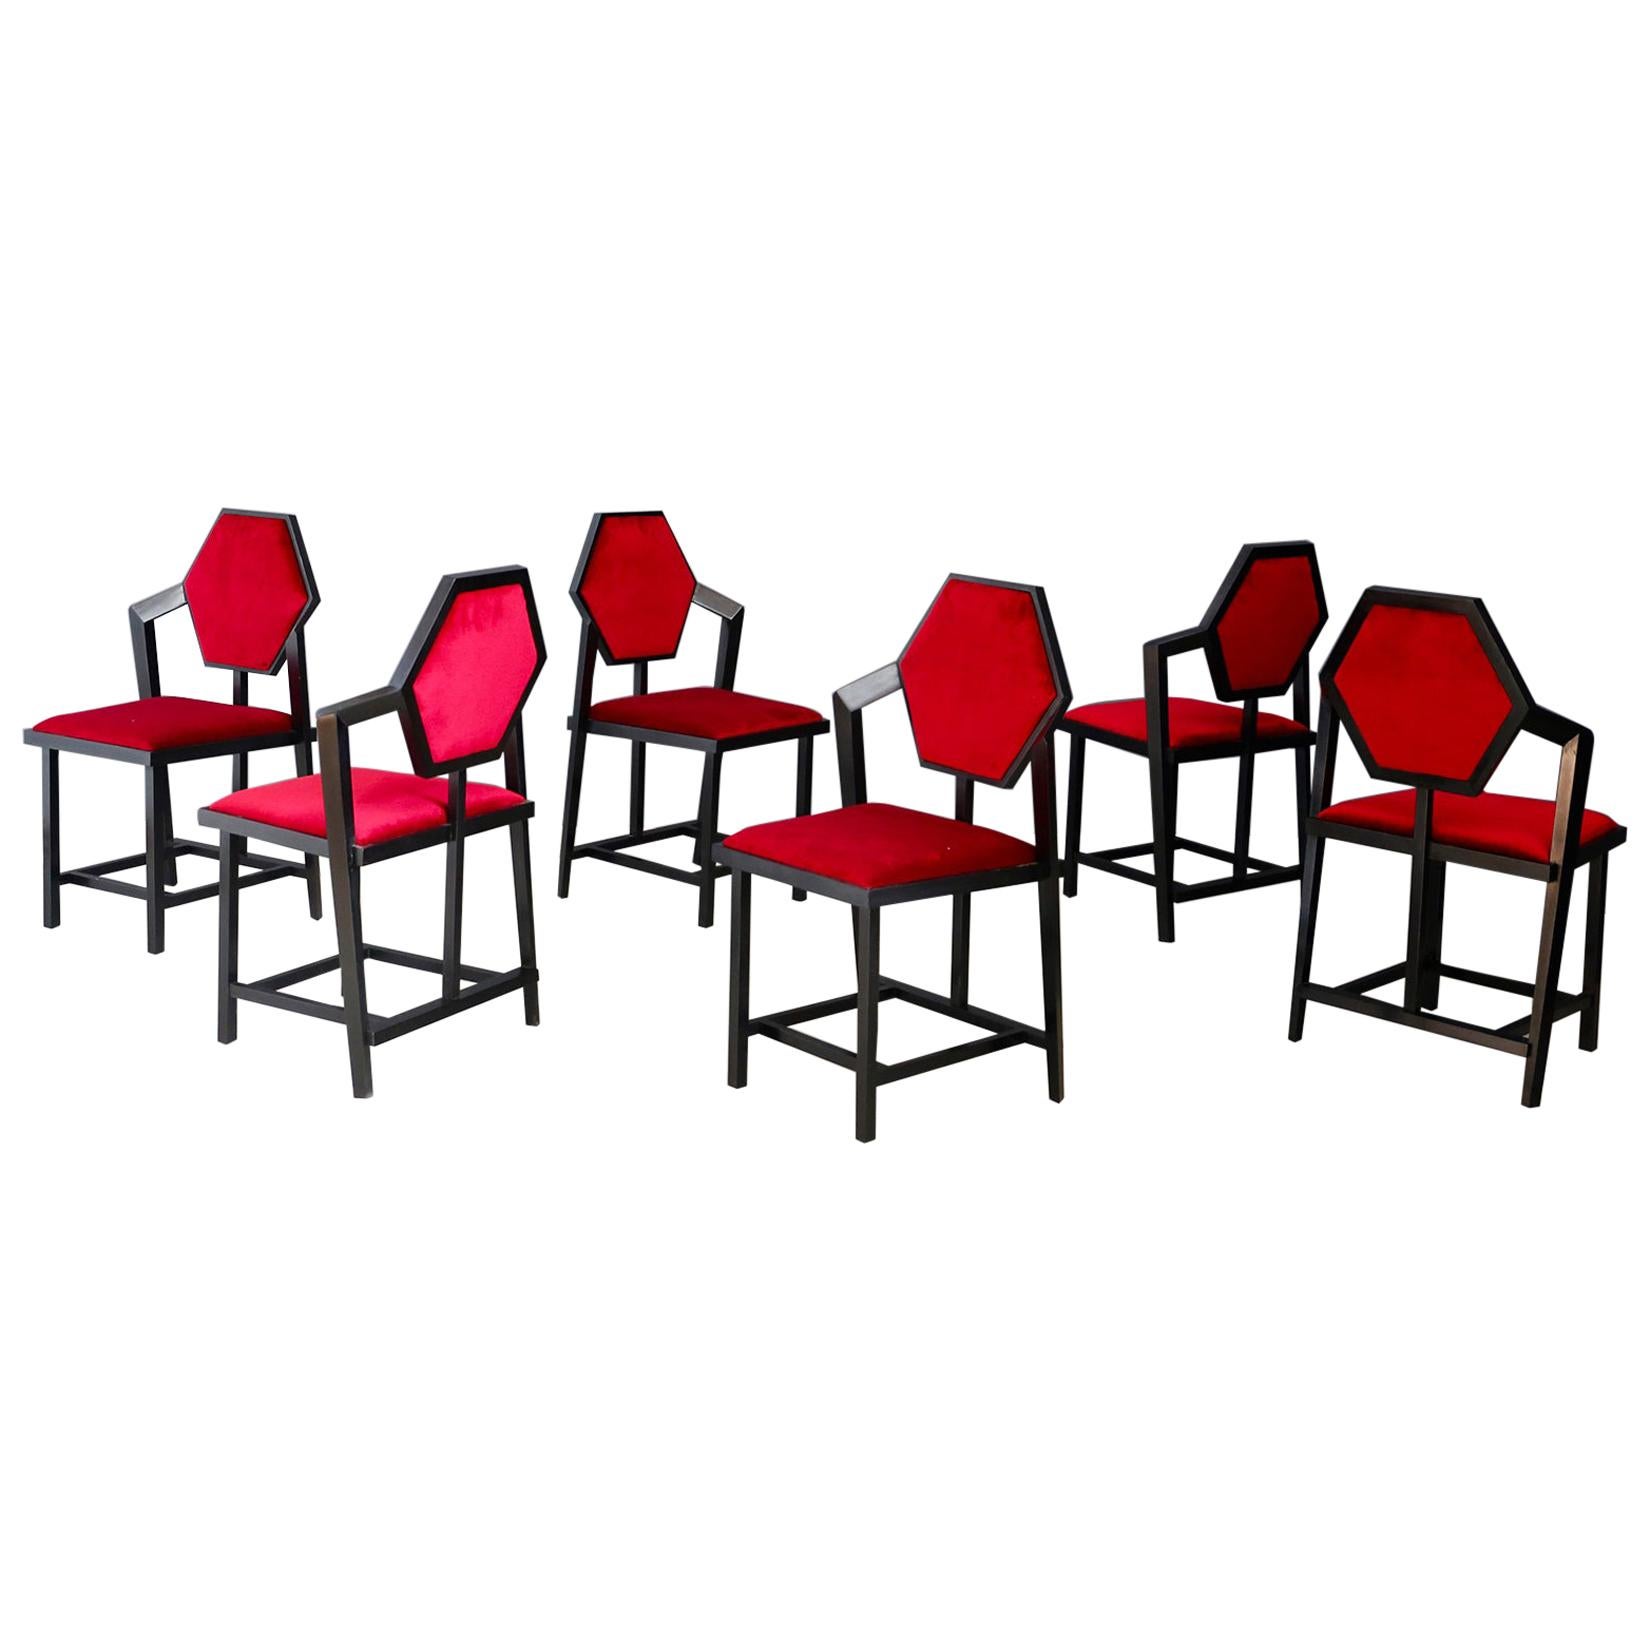 Set of Six Red Chairs Designed by Frank Lloyd Wright from the 1980s